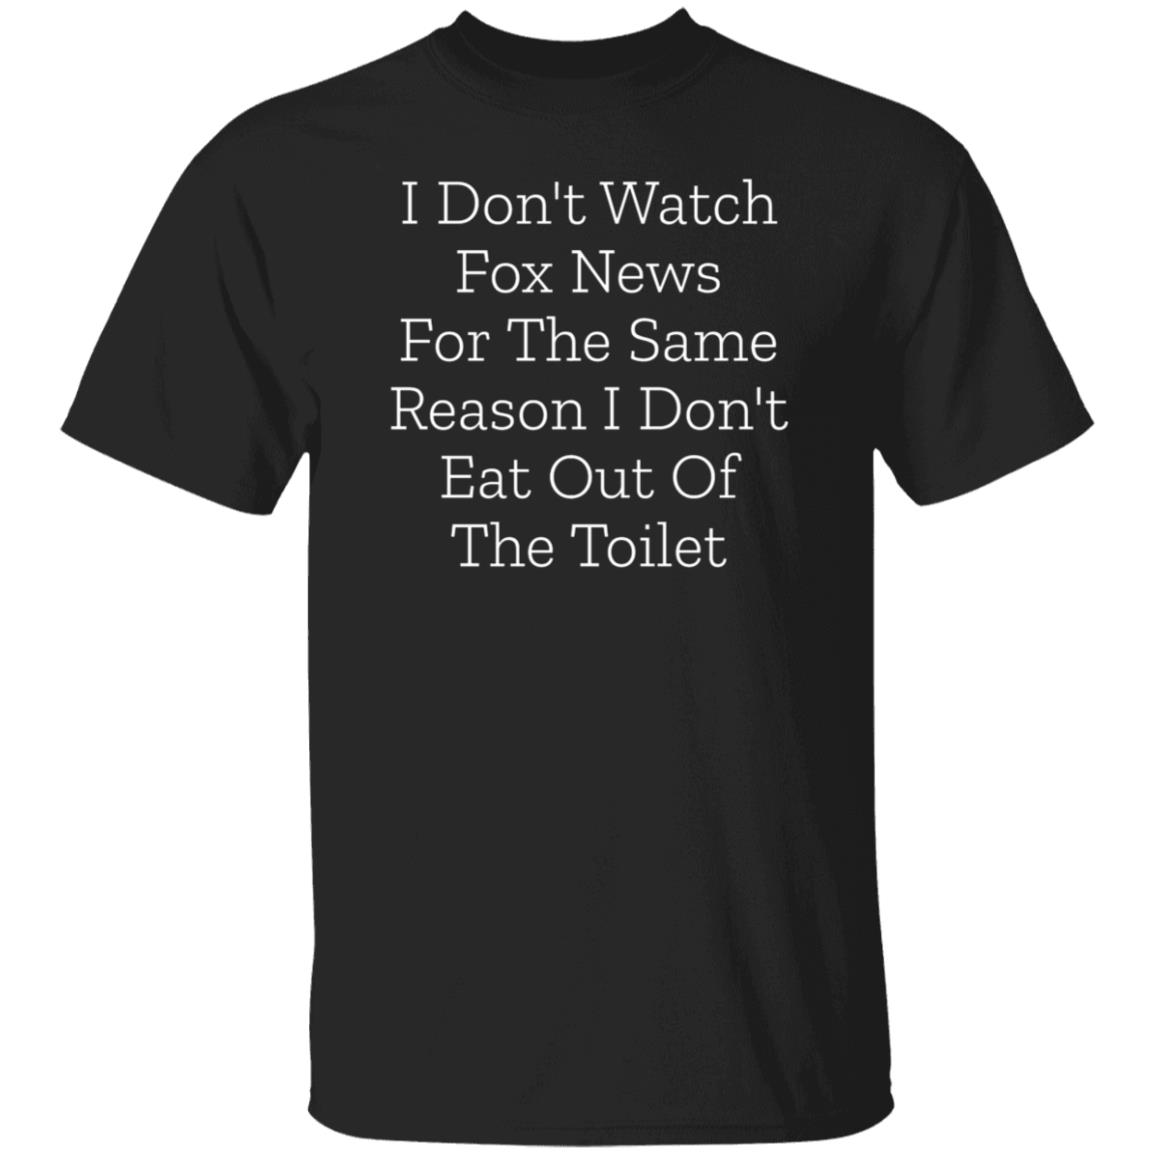 I Don't Watch Fox News For The Same Reason I Don't Eat Out Of The Toilet Shirt